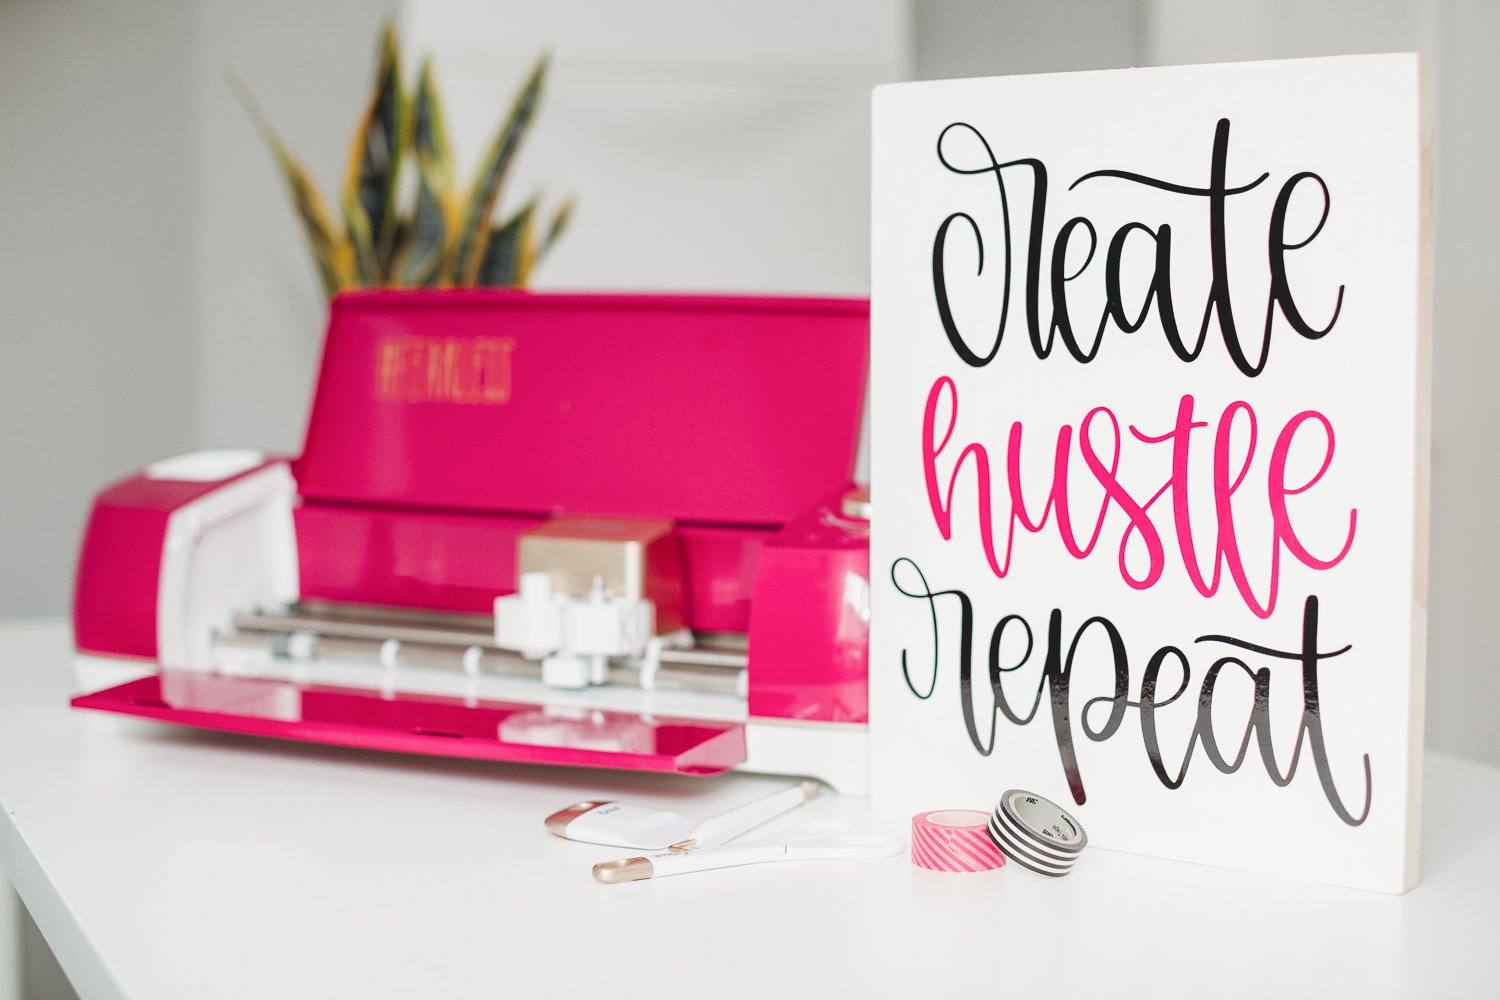 A close up of a red Cricut machine with a sign next to it that says, "Create, Hustle, Repeat"